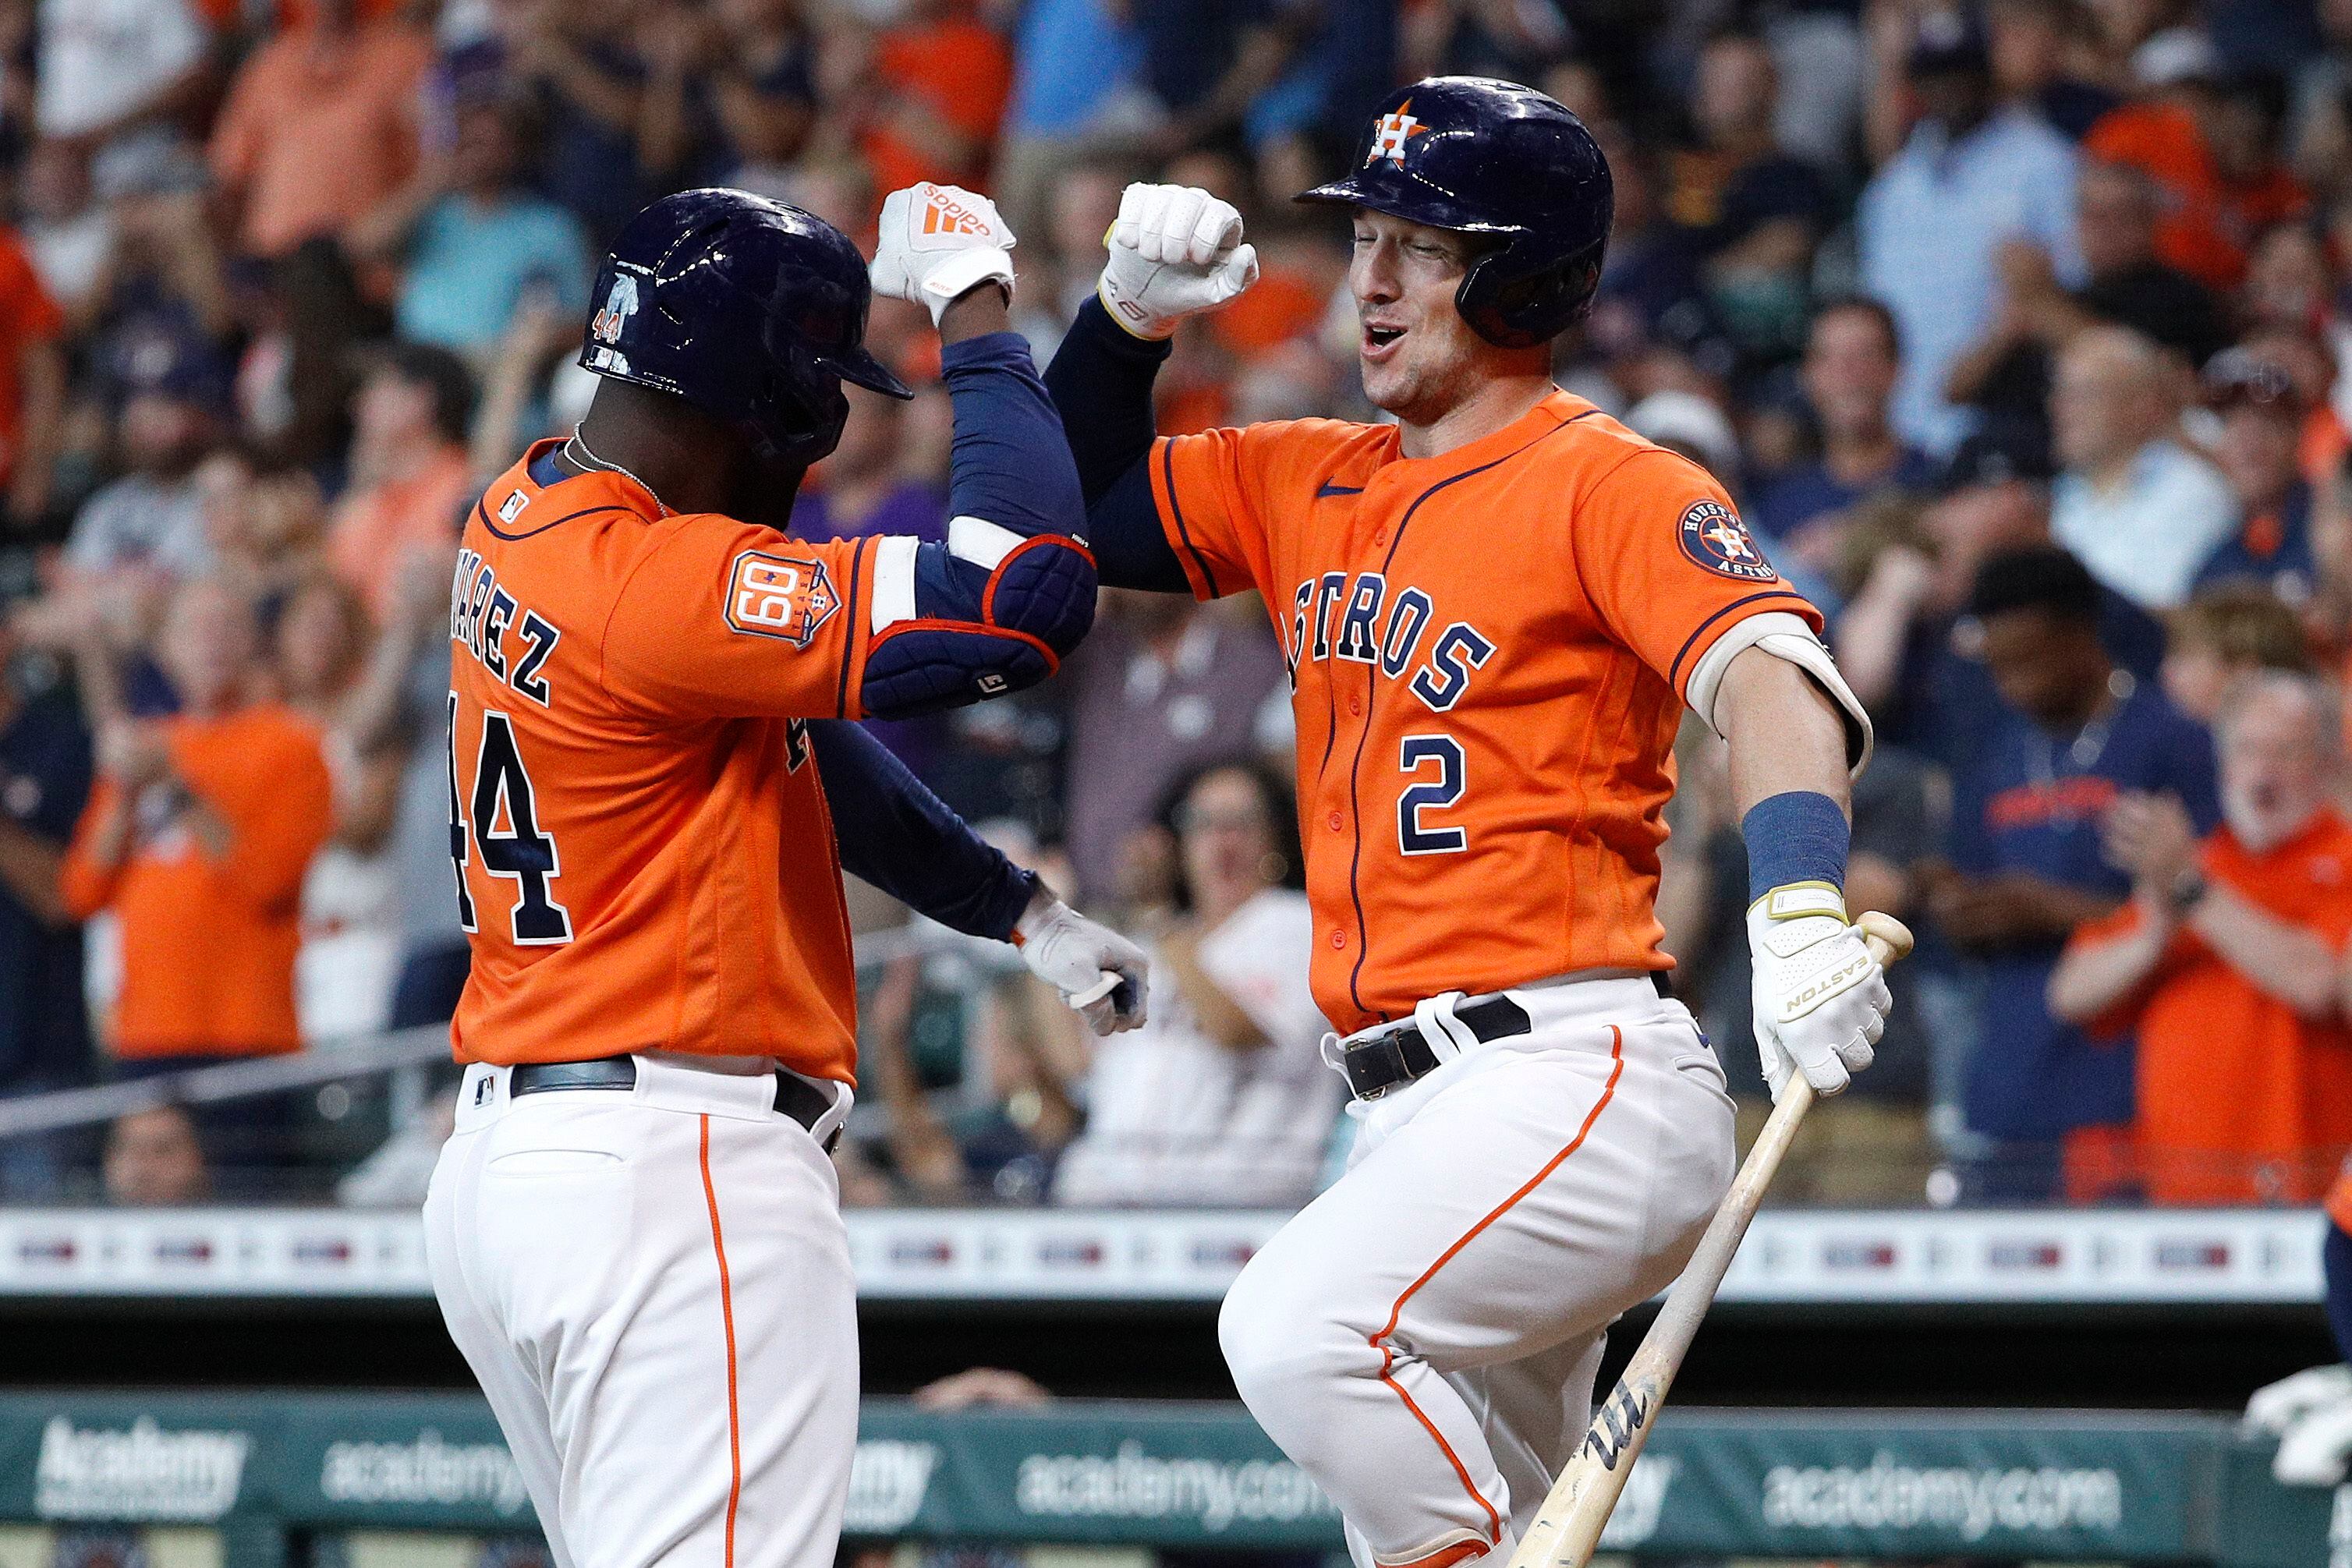 Astros' Alvarez, Pena leave with injuries after collision